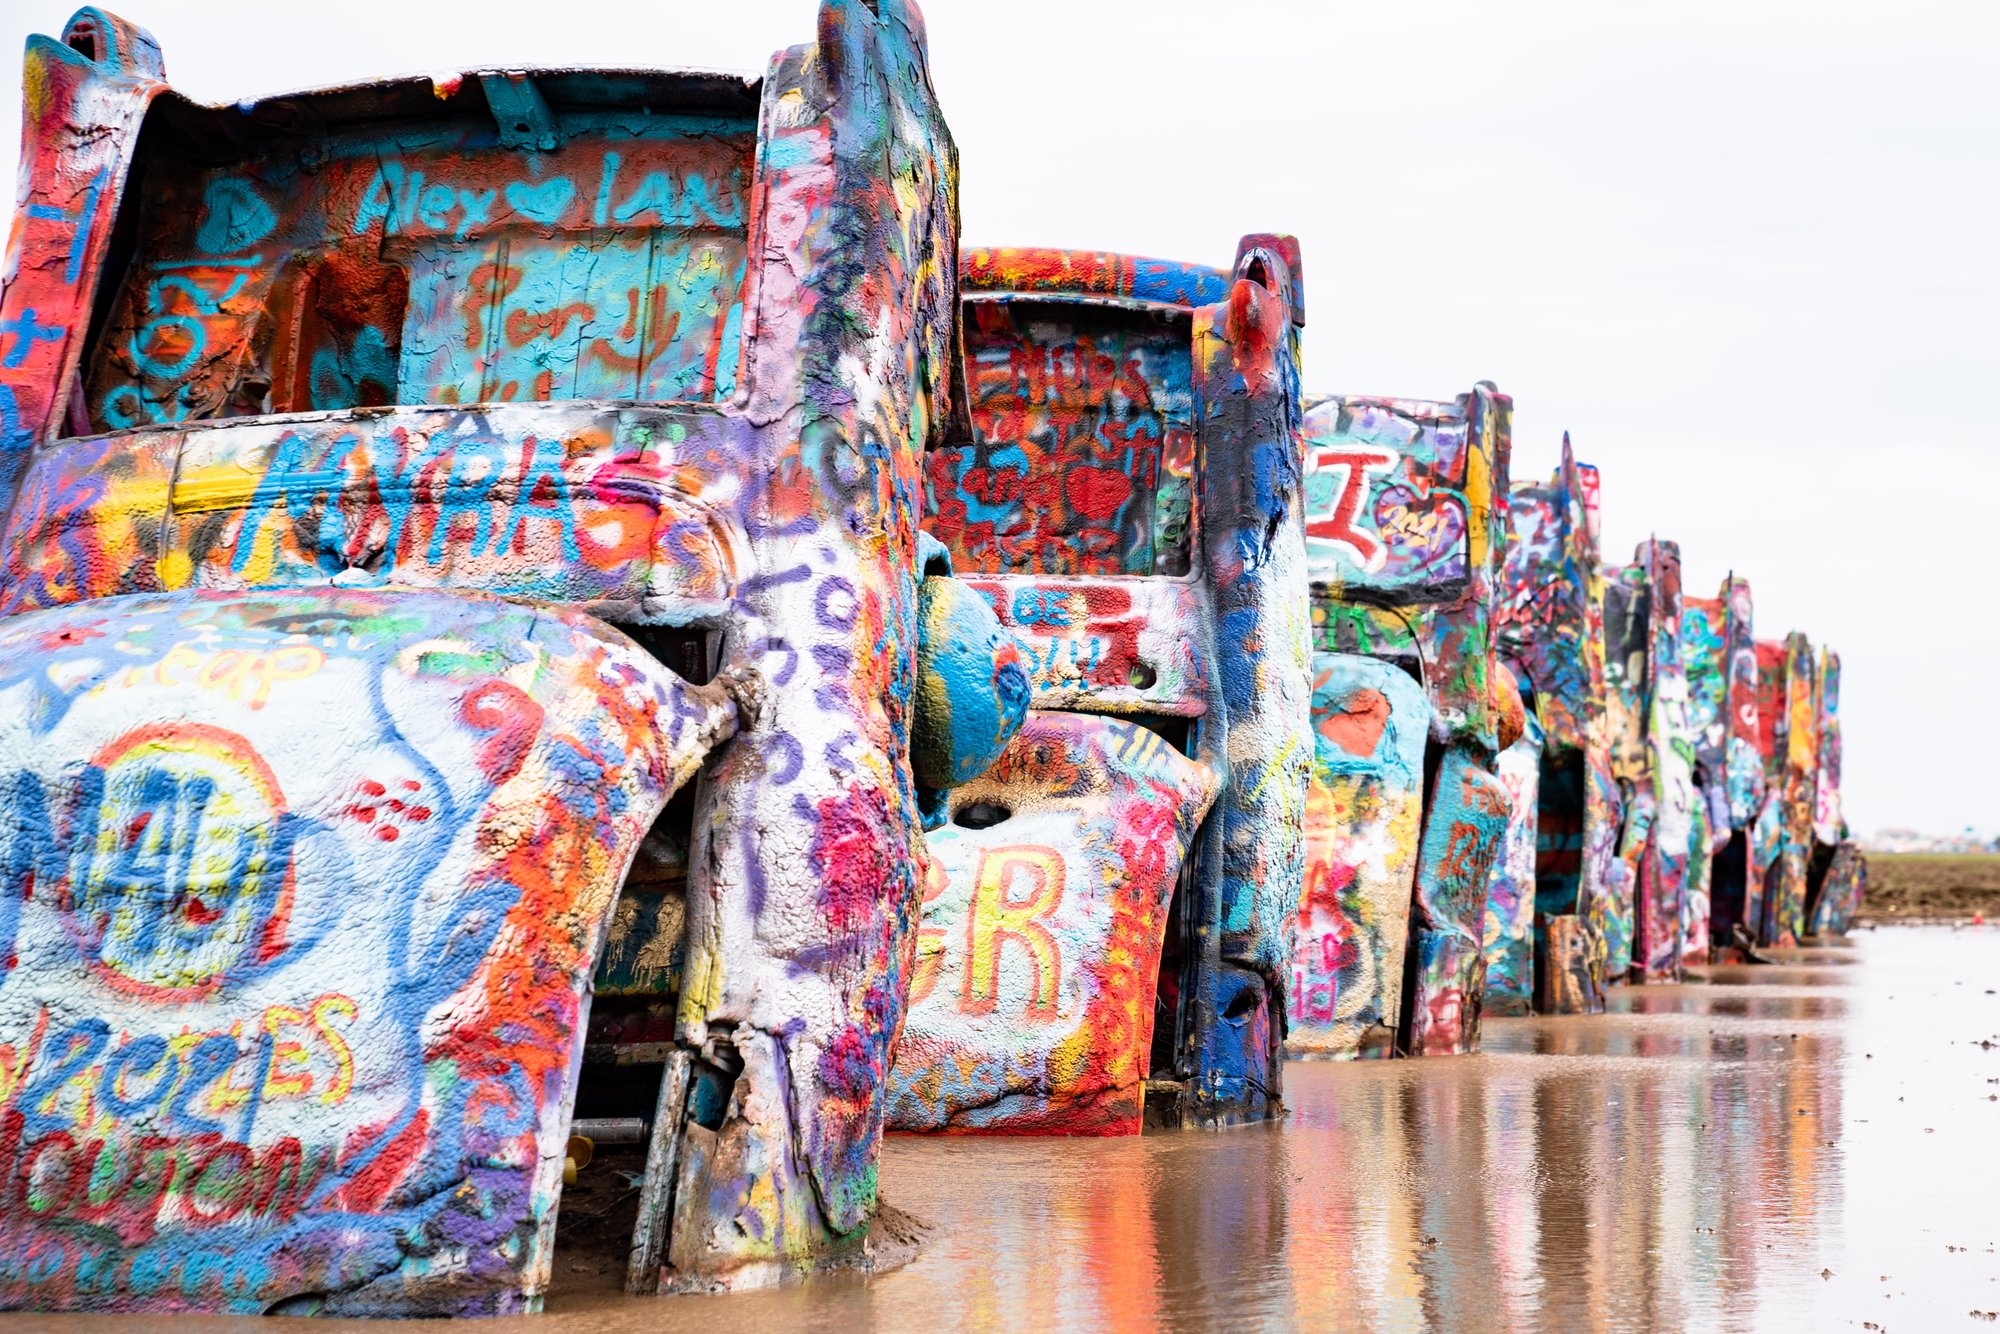 Cadillac Ranch texas pitstop on route 66 road trip